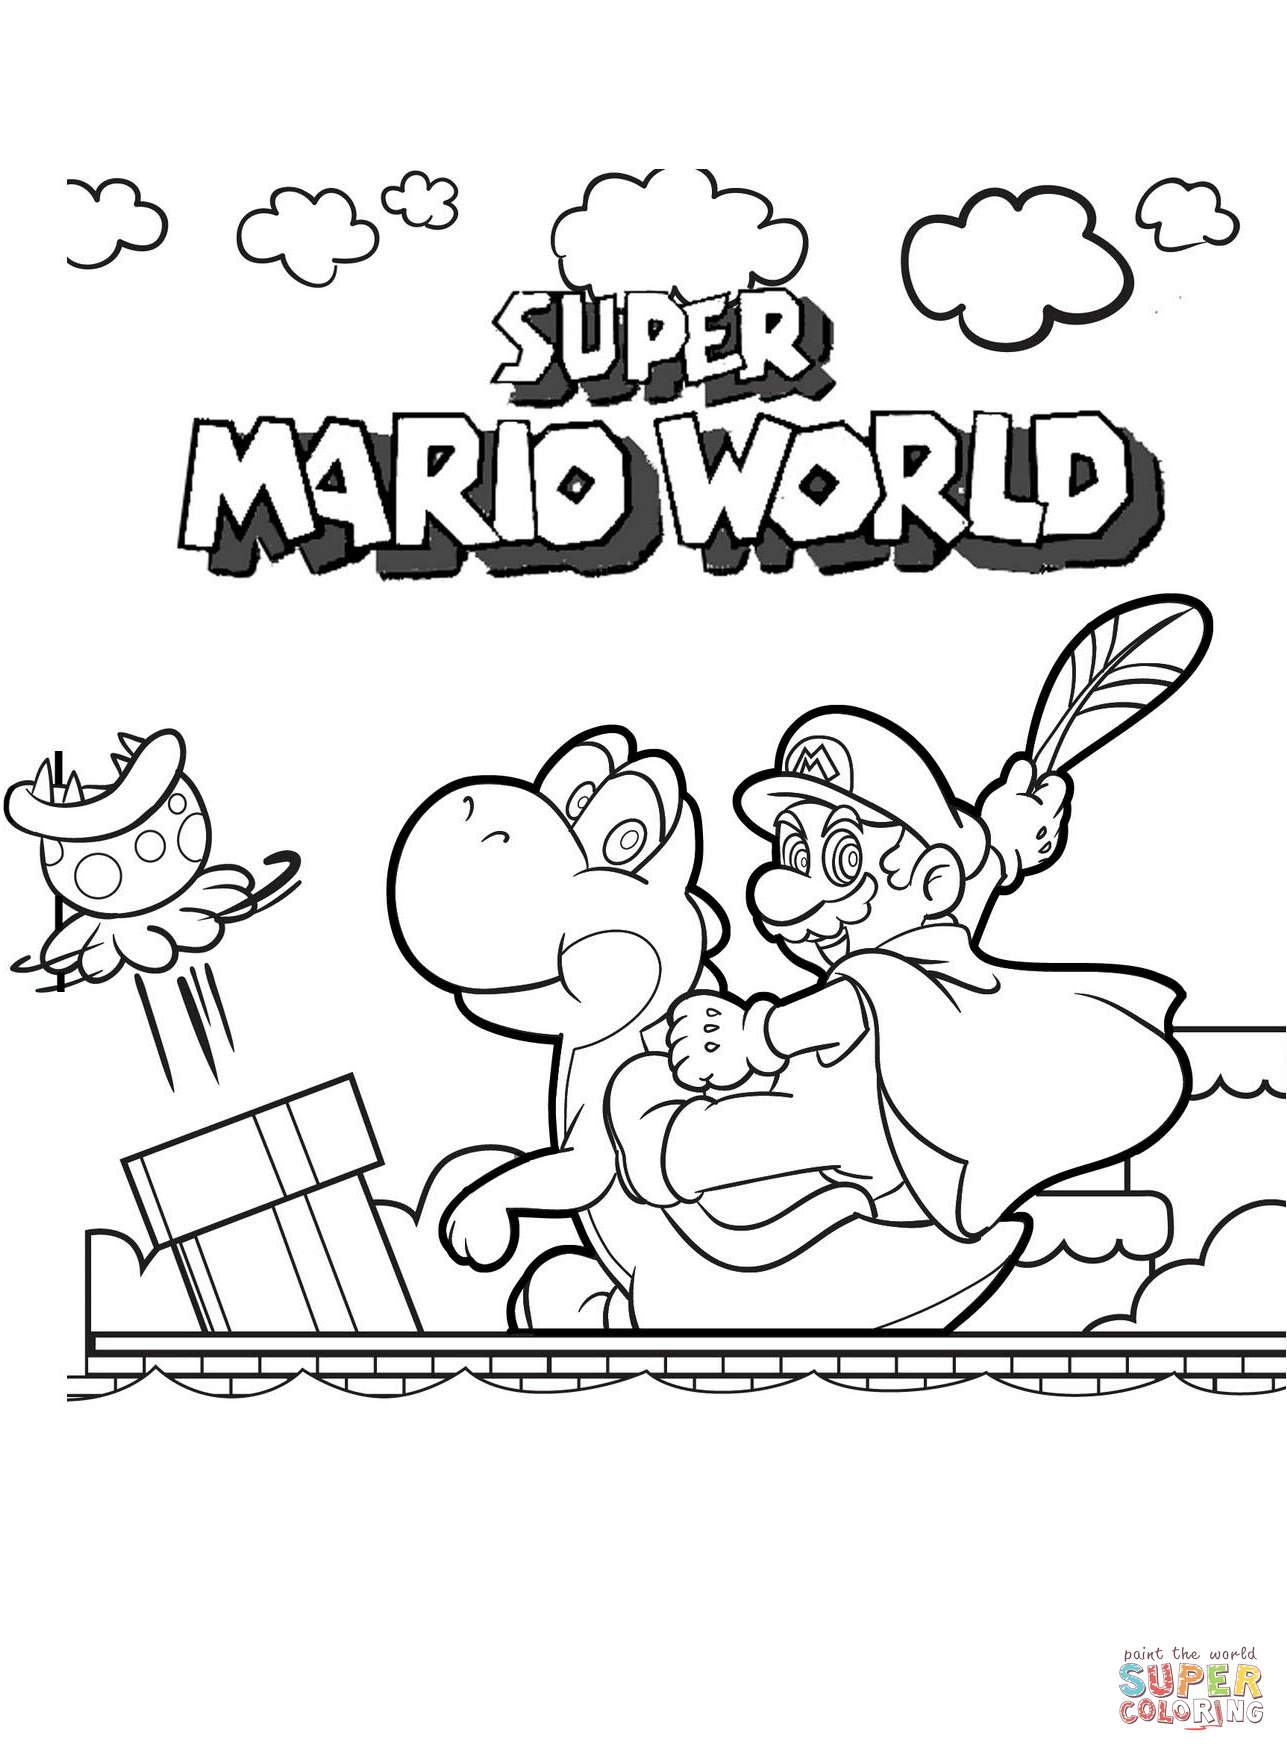 Super mario world coloring page free printable coloring pages